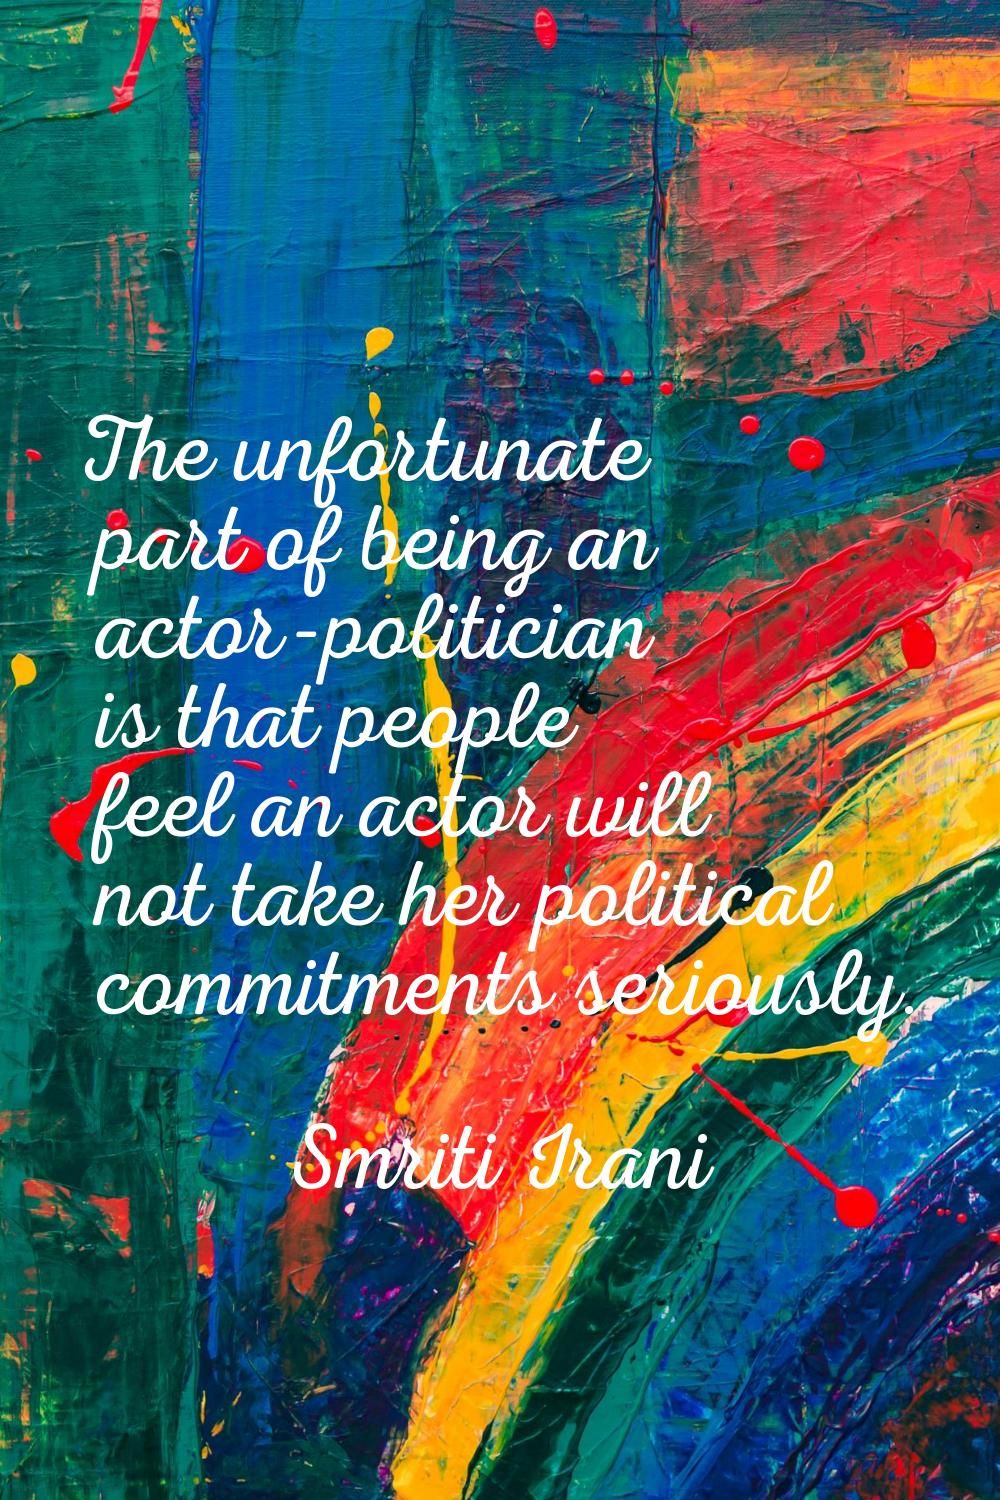 The unfortunate part of being an actor-politician is that people feel an actor will not take her po